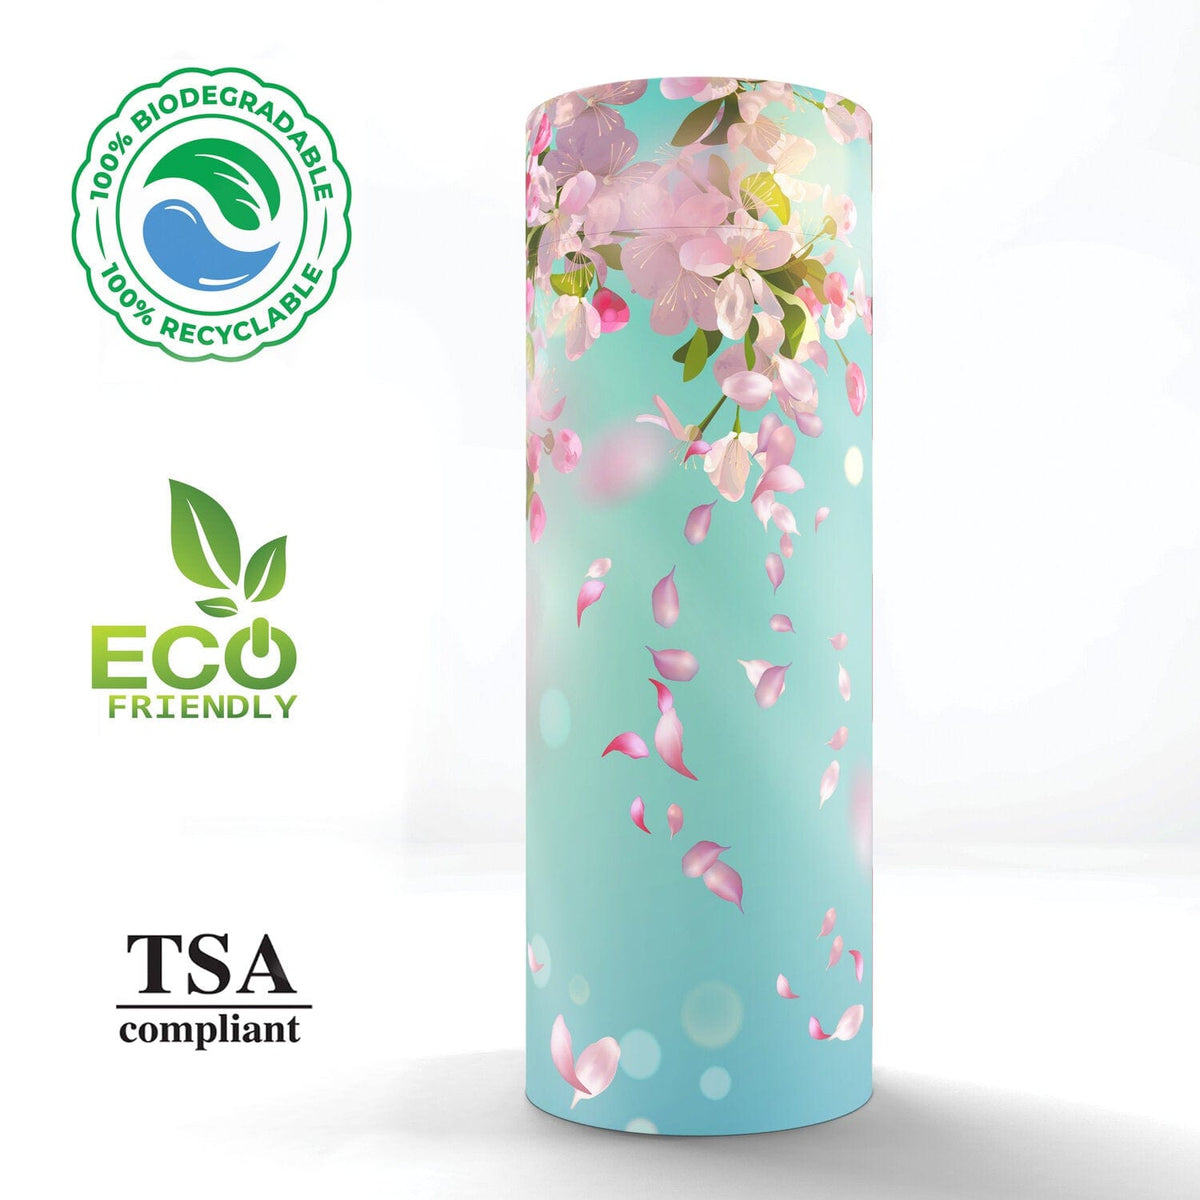 Commemorative Cremation Urns Along the Breeze Biodegradable &amp; Eco Friendly Burial or Scattering Urn / Tube